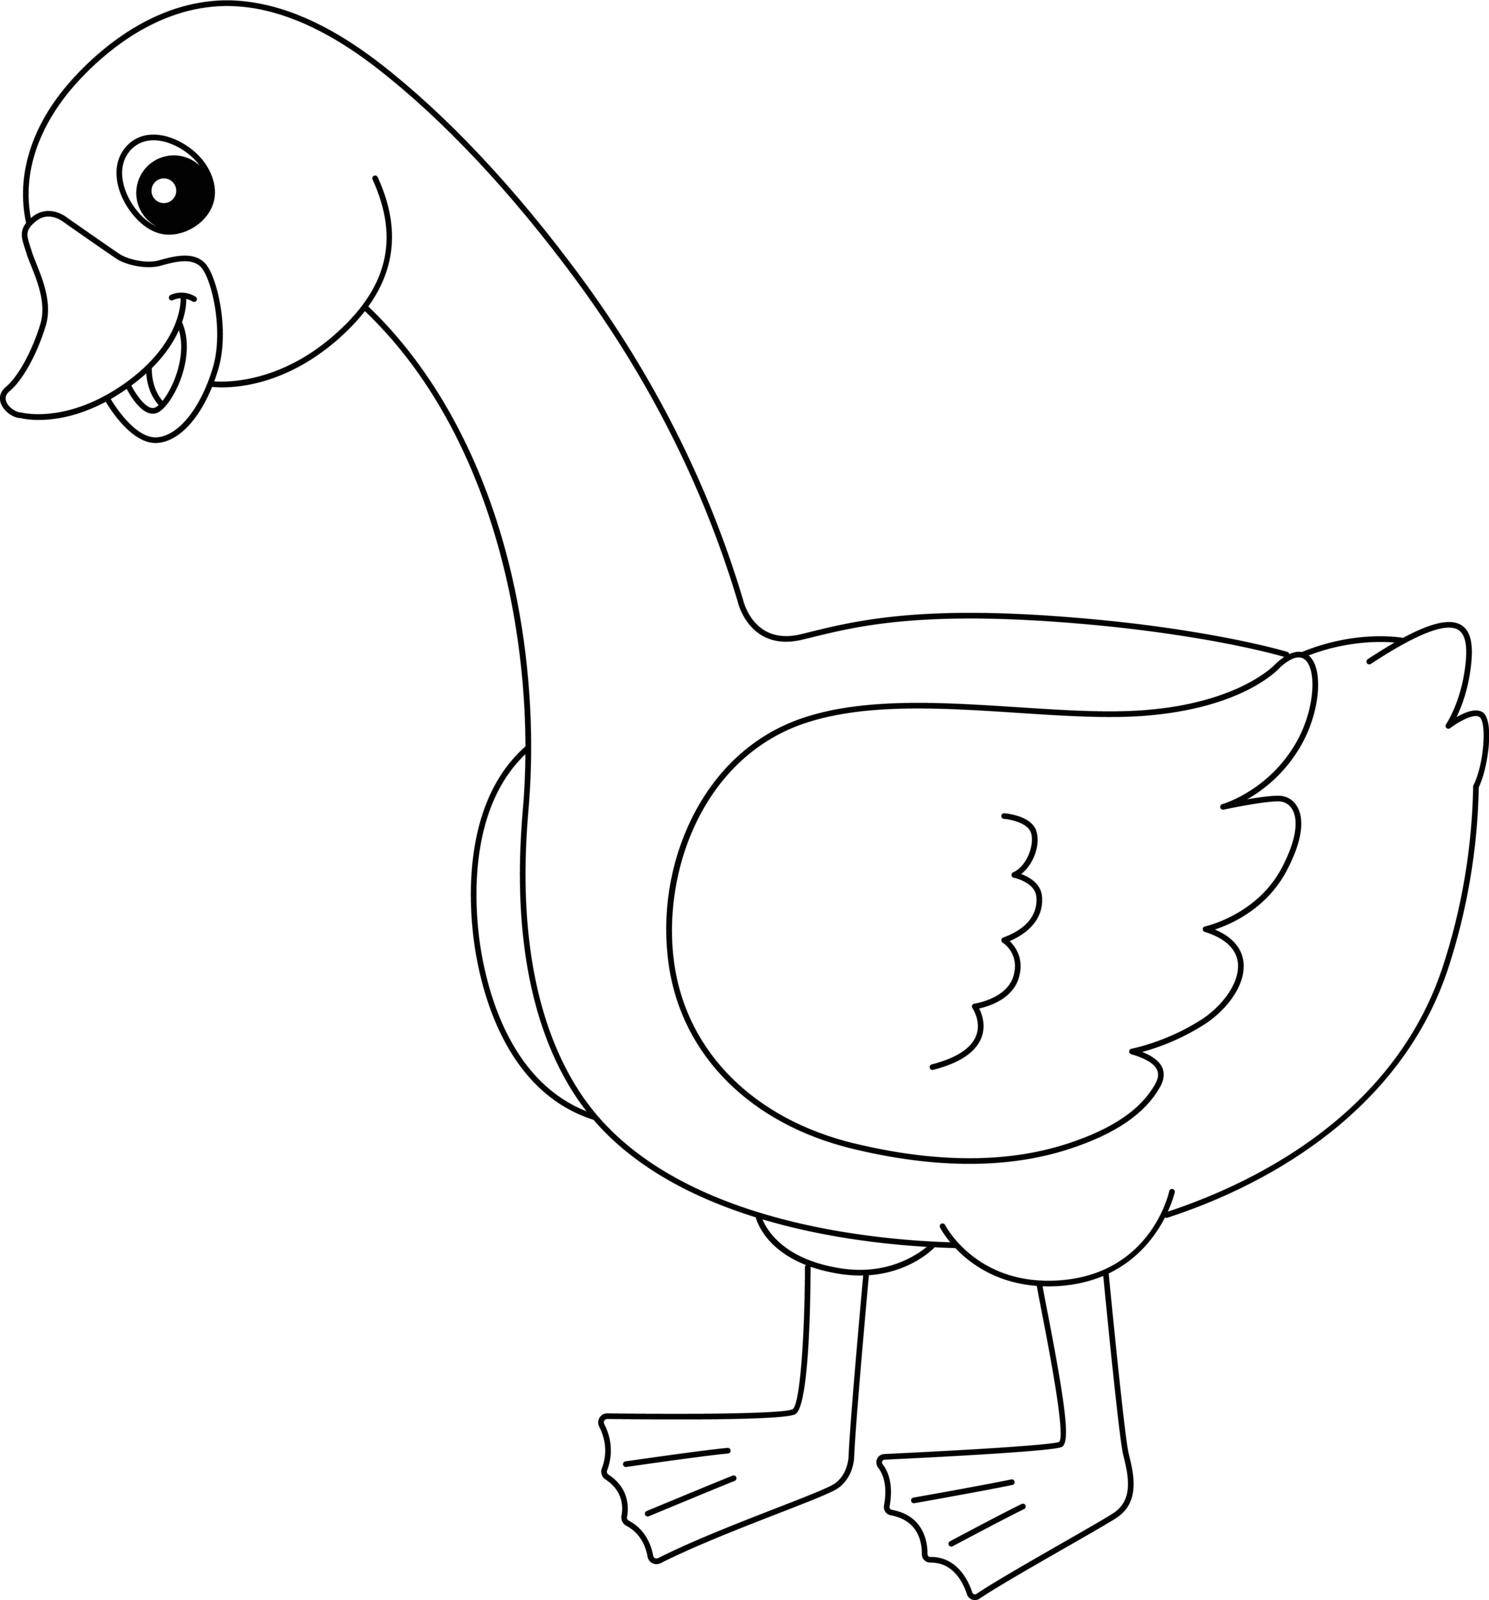 Goose Coloring Page Isolated for Kids by abbydesign